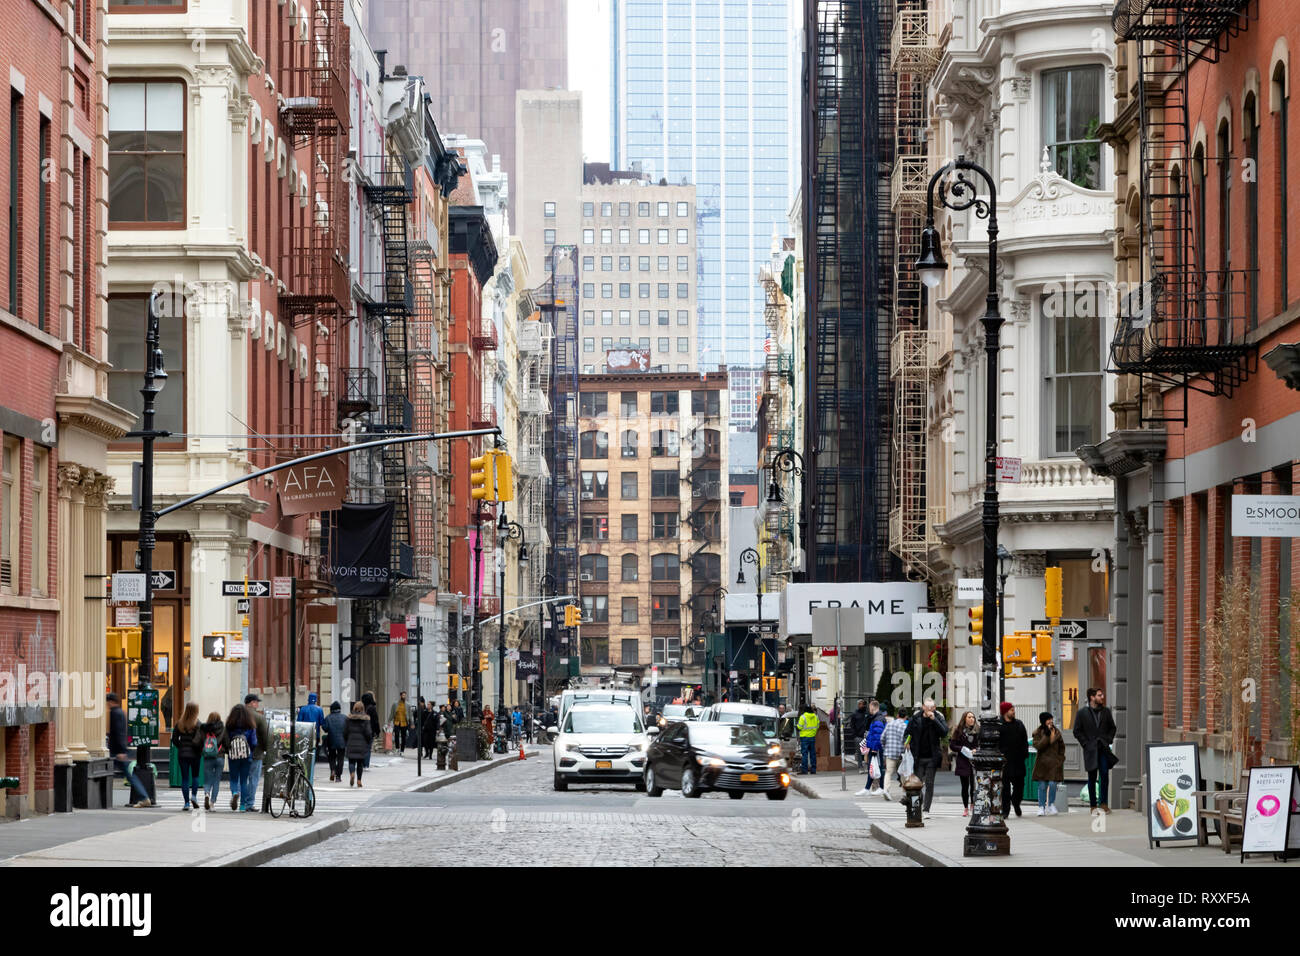 NEW YORK CITY - CIRCA 2019: Busy intersection of Broome and Greene Streets is crowded with people and cars in the SoHo neighborhood of Manhattan in NY Stock Photo